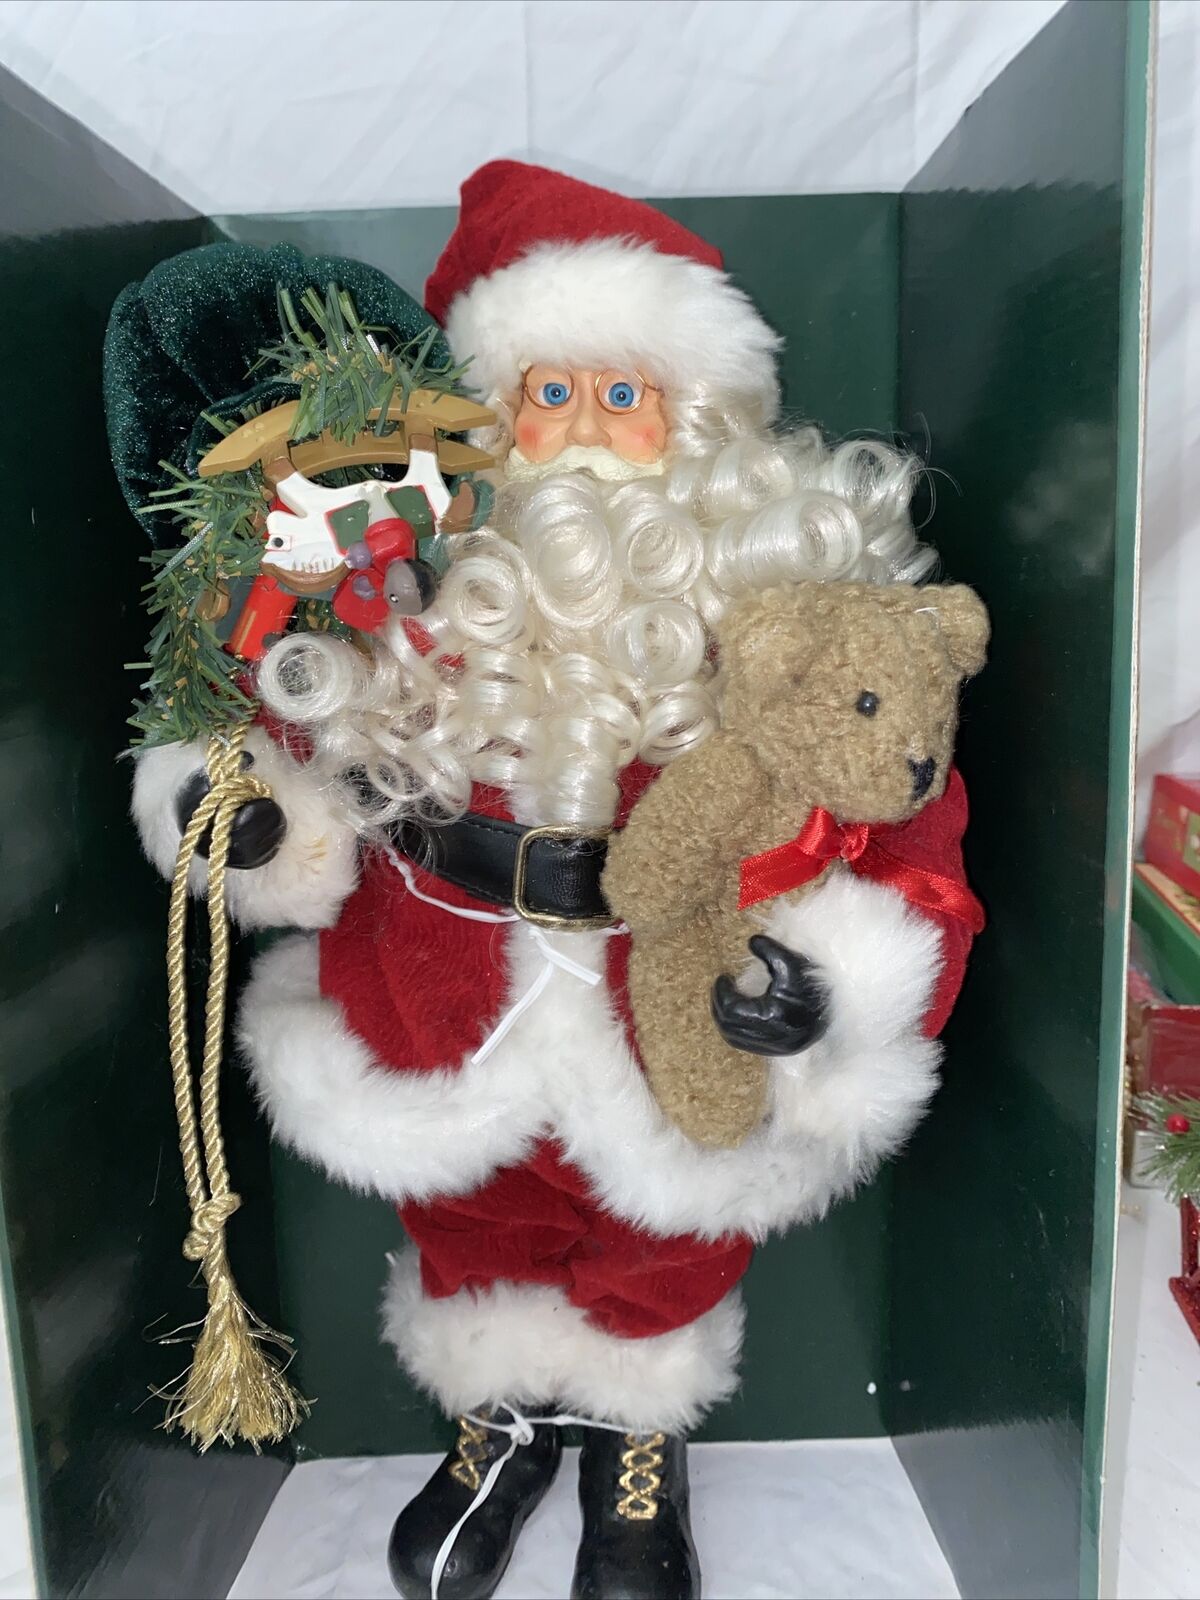 Home for the Holidays Collectible Santa 16 Inch Heavy￼